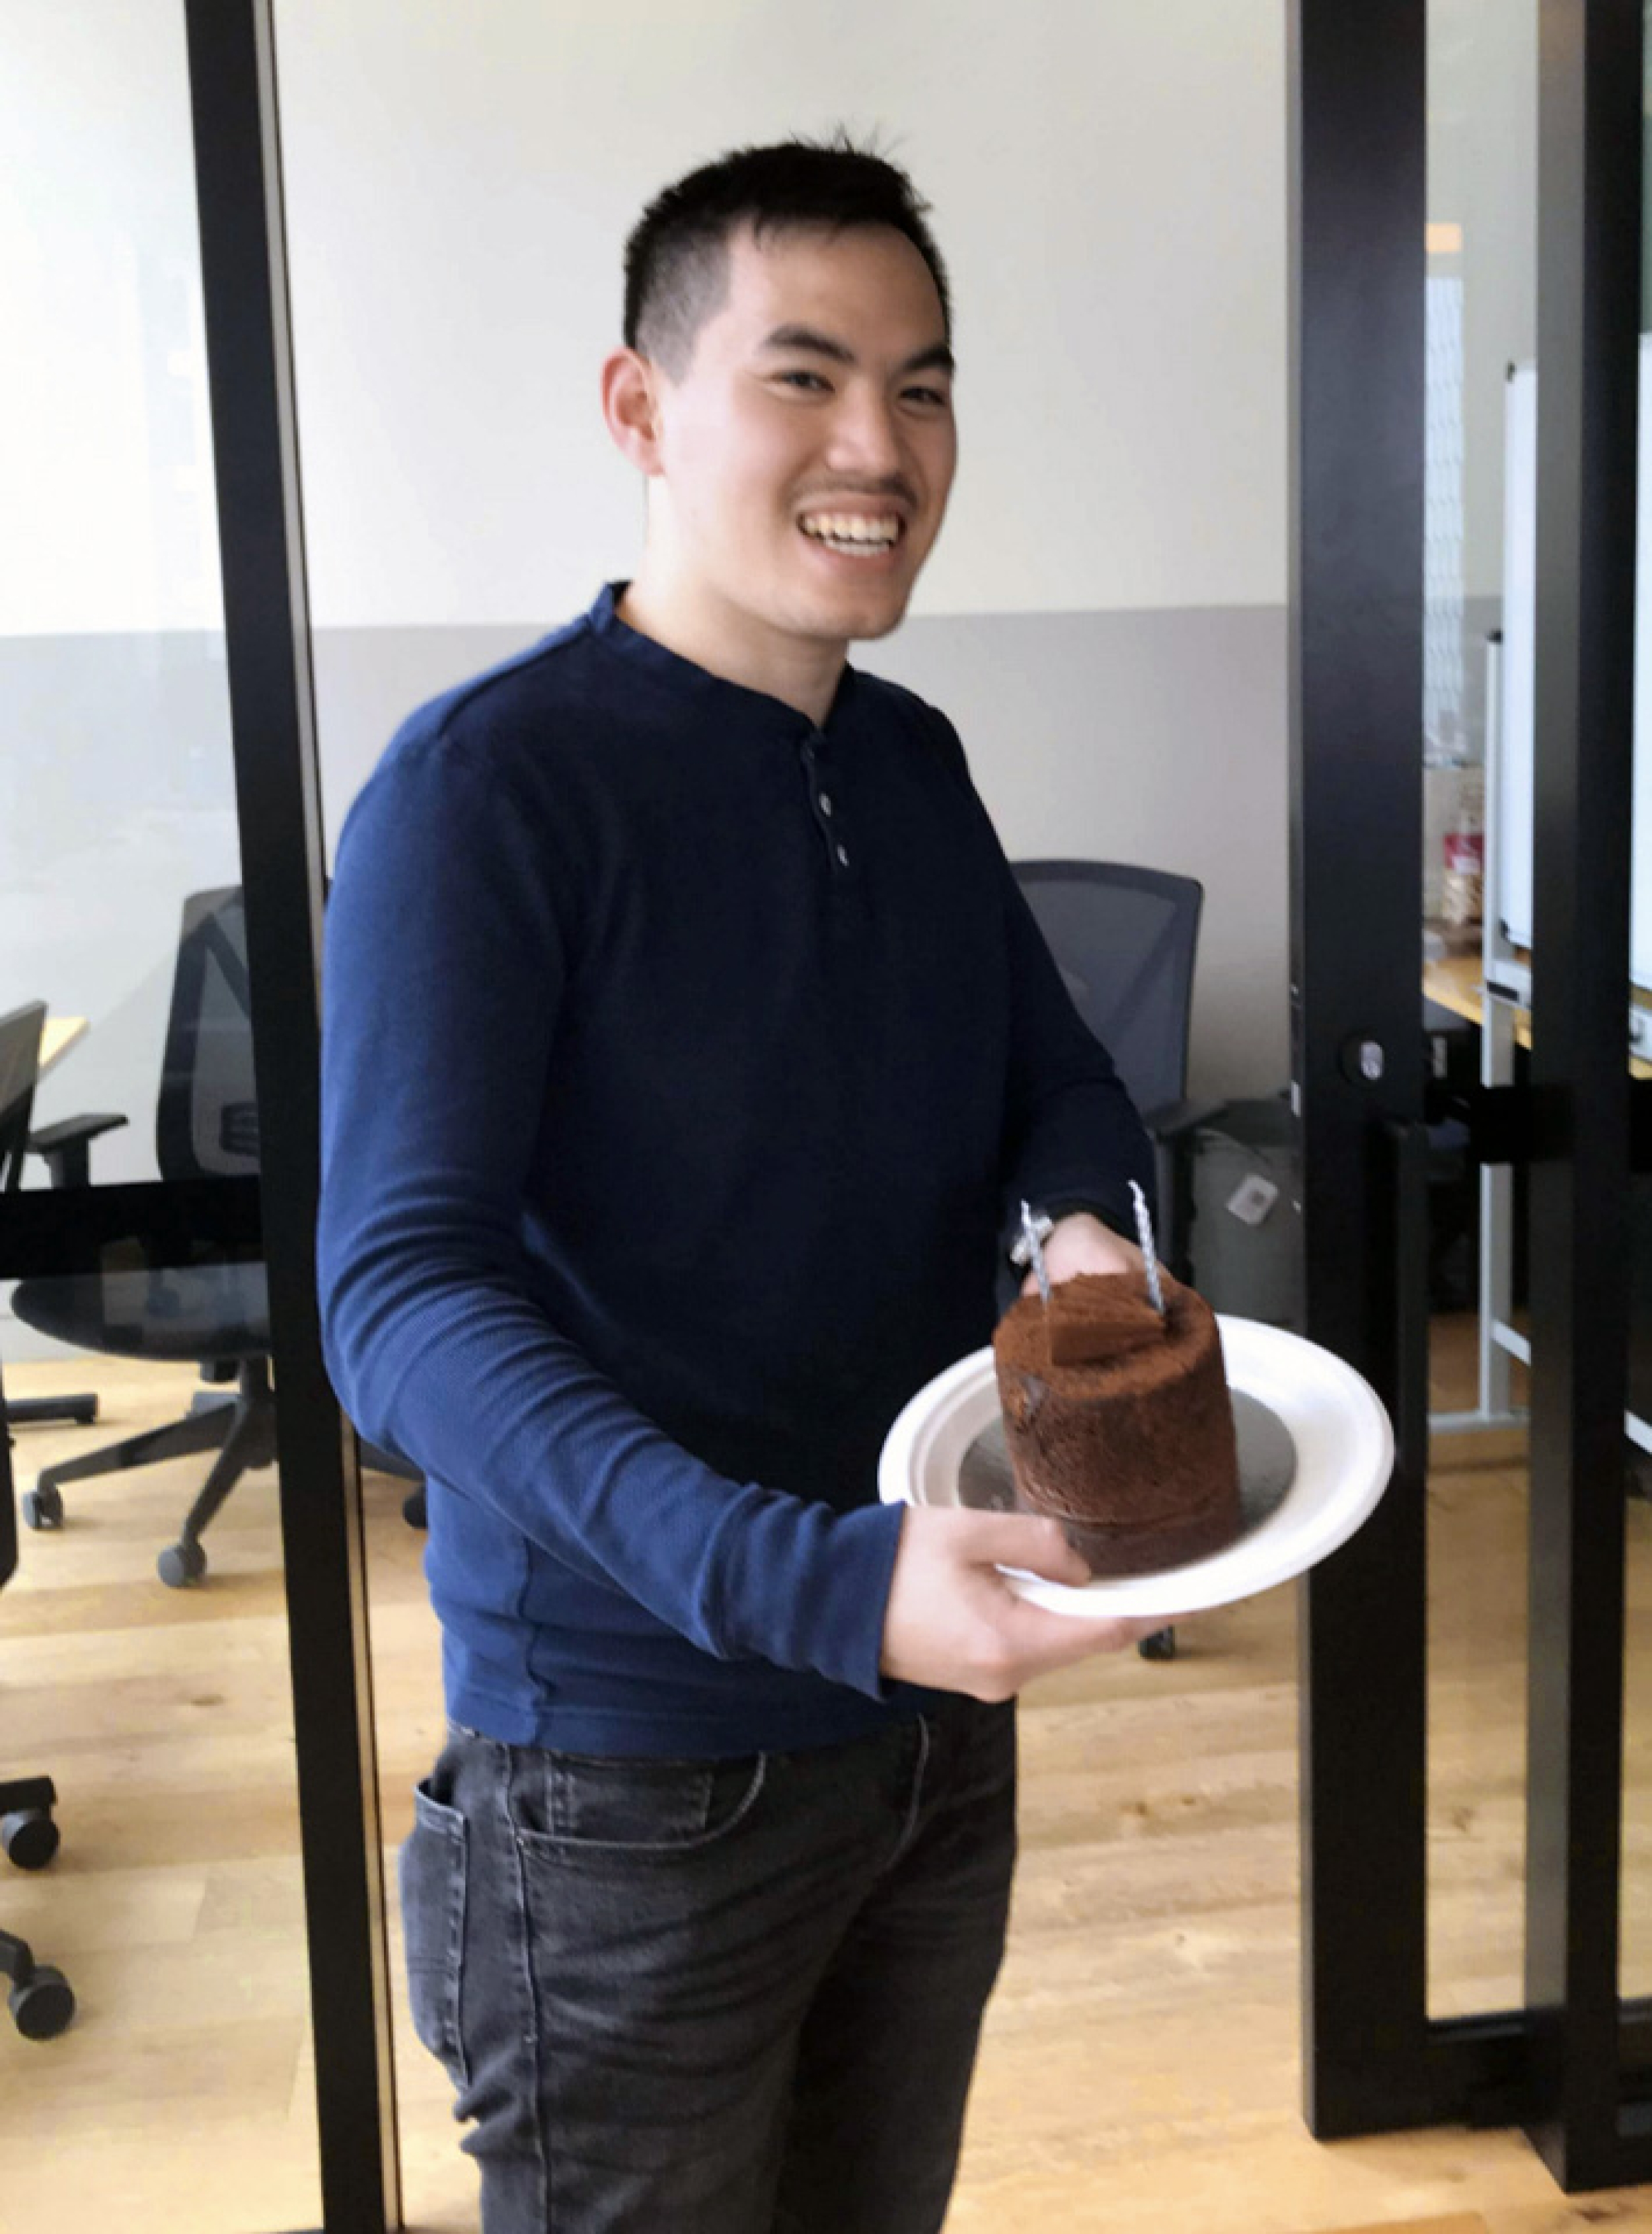 Snapshot of an mx51 employee who is posing holding a cake with birthday candles in his hands and smiling.